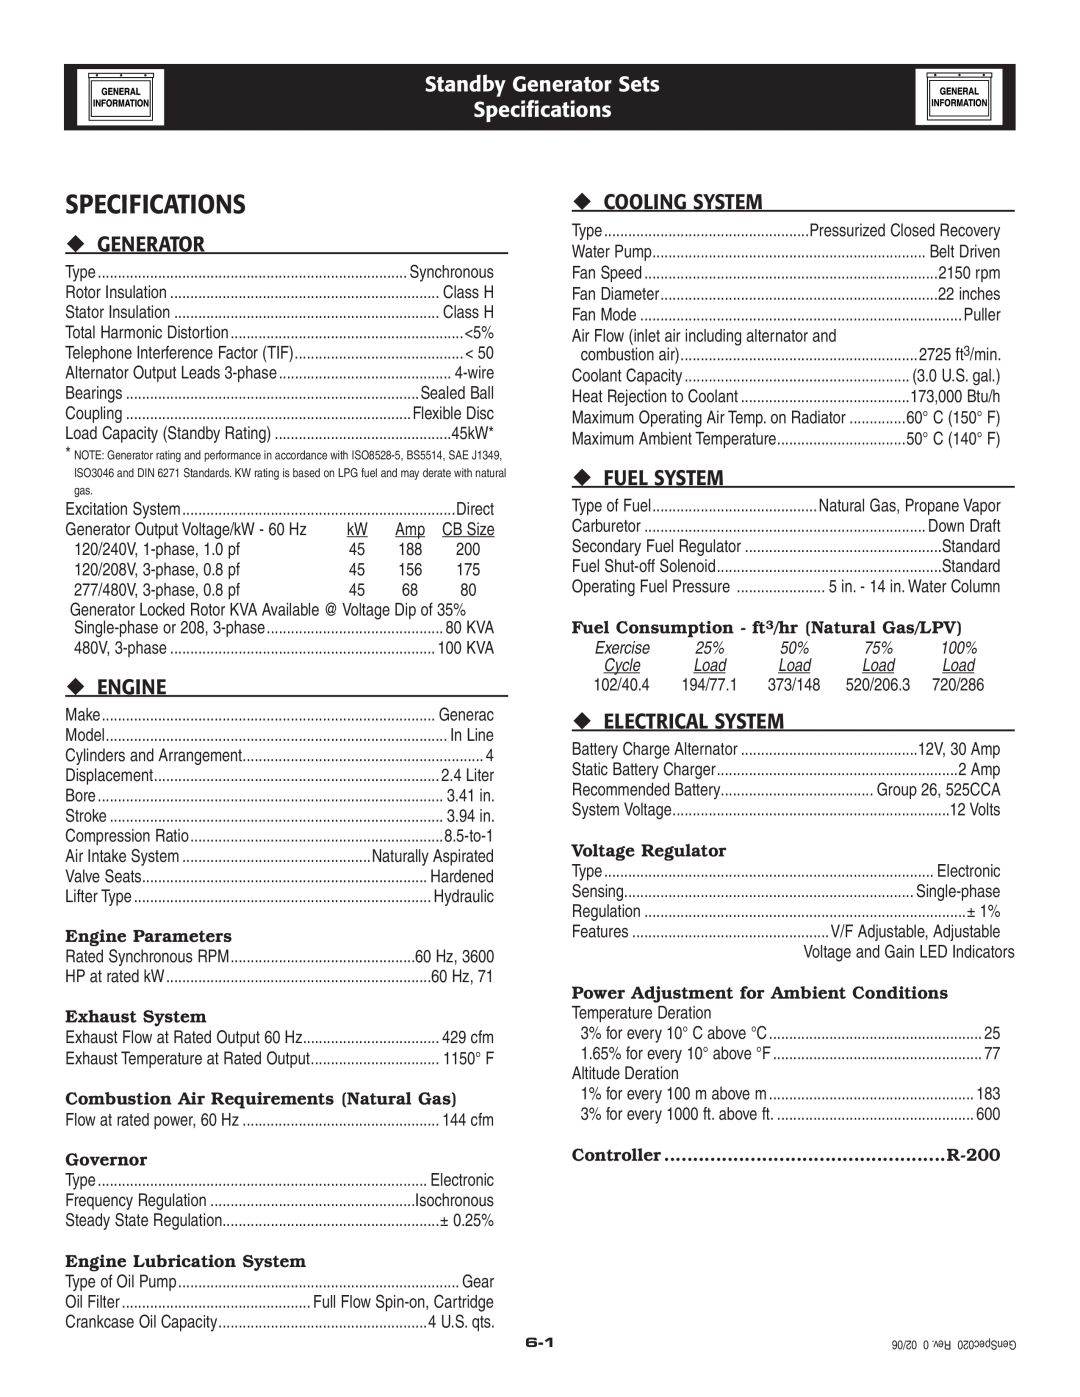 Generac Power Systems 005262-1 Standby Generator Sets Specifications, ‹ Generator, ‹ Engine, ‹ Cooling System, 100% 